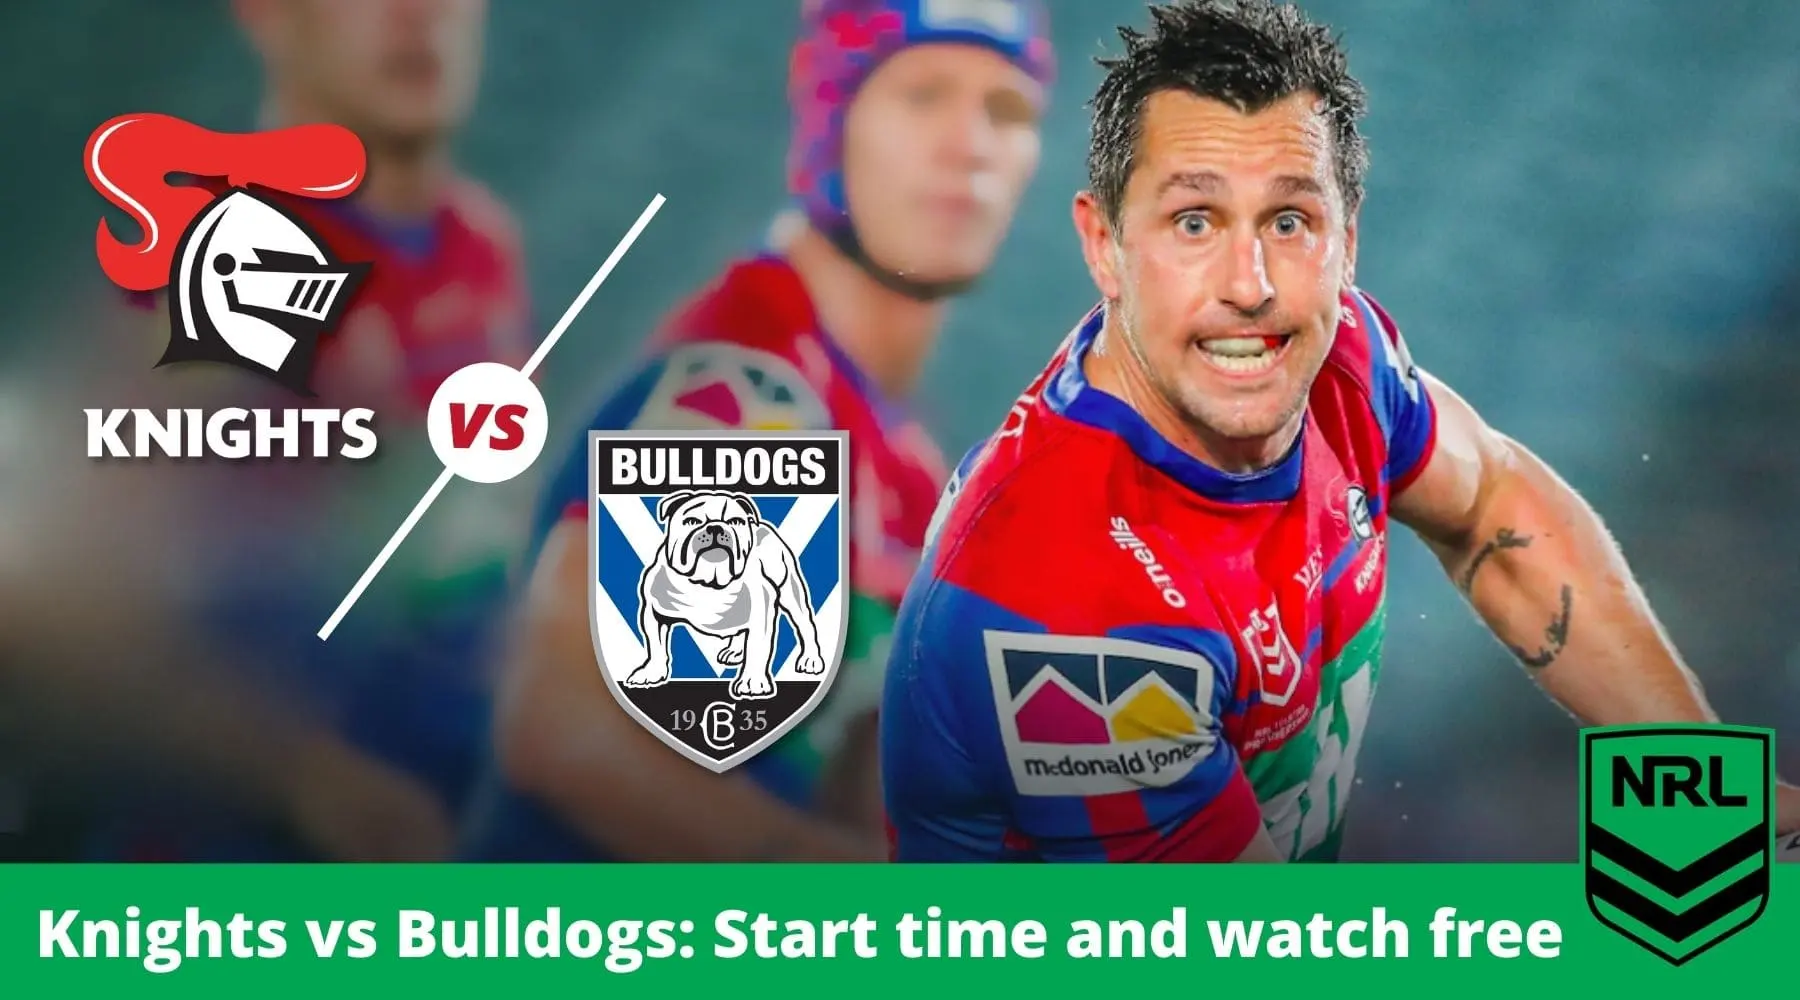 How to watch Knights vs Bulldogs NRL live and free